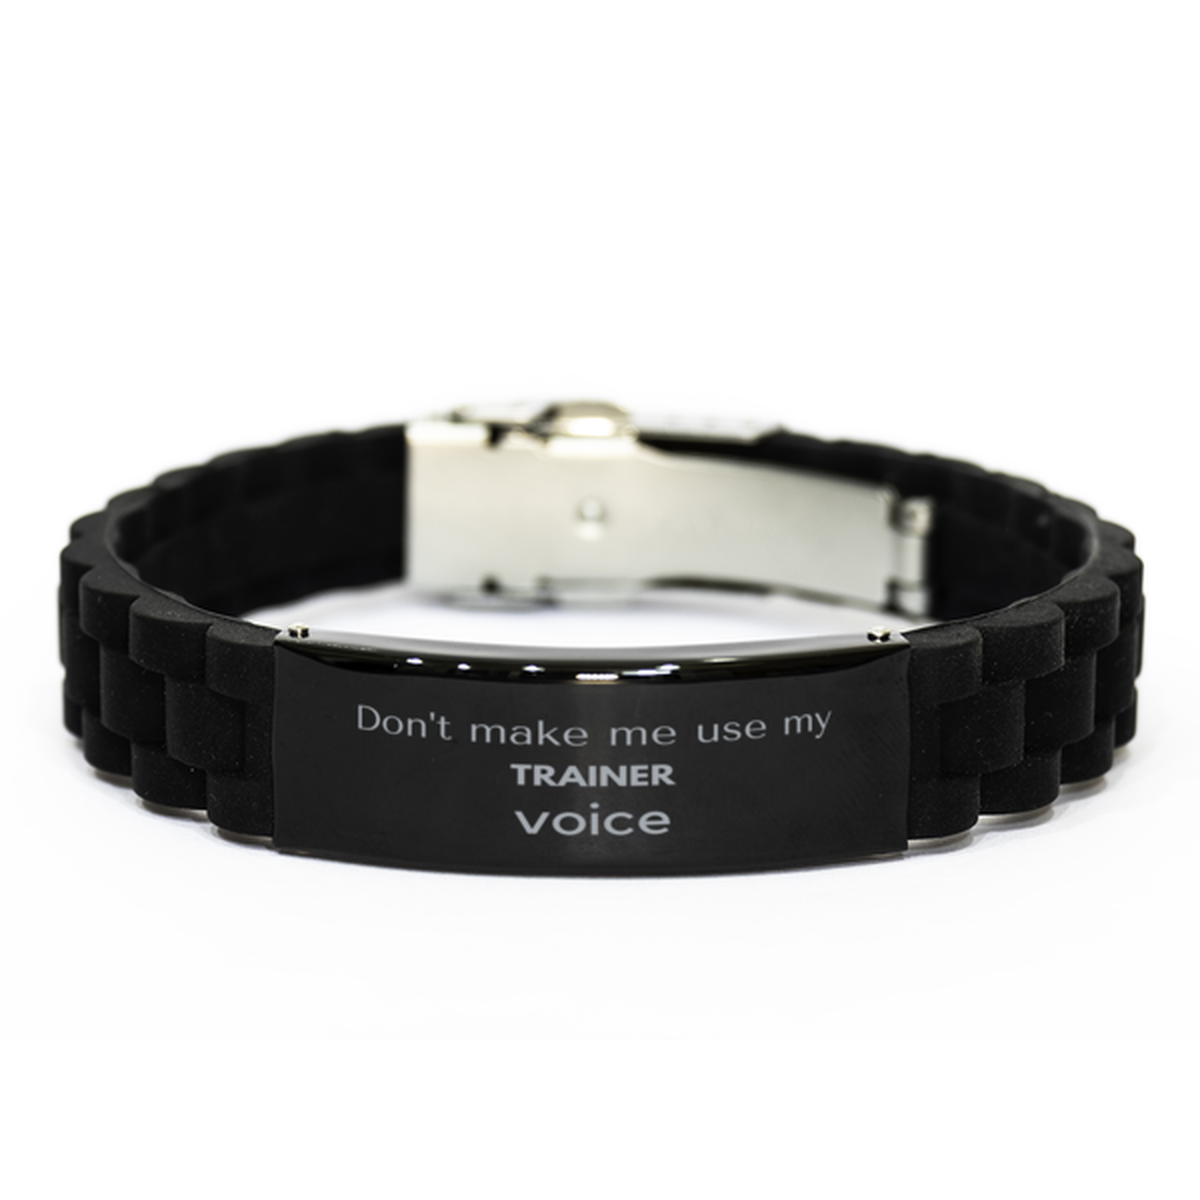 Don't make me use my Trainer voice, Sarcasm Trainer Gifts, Christmas Trainer Black Glidelock Clasp Bracelet Birthday Unique Gifts For Trainer Coworkers, Men, Women, Colleague, Friends